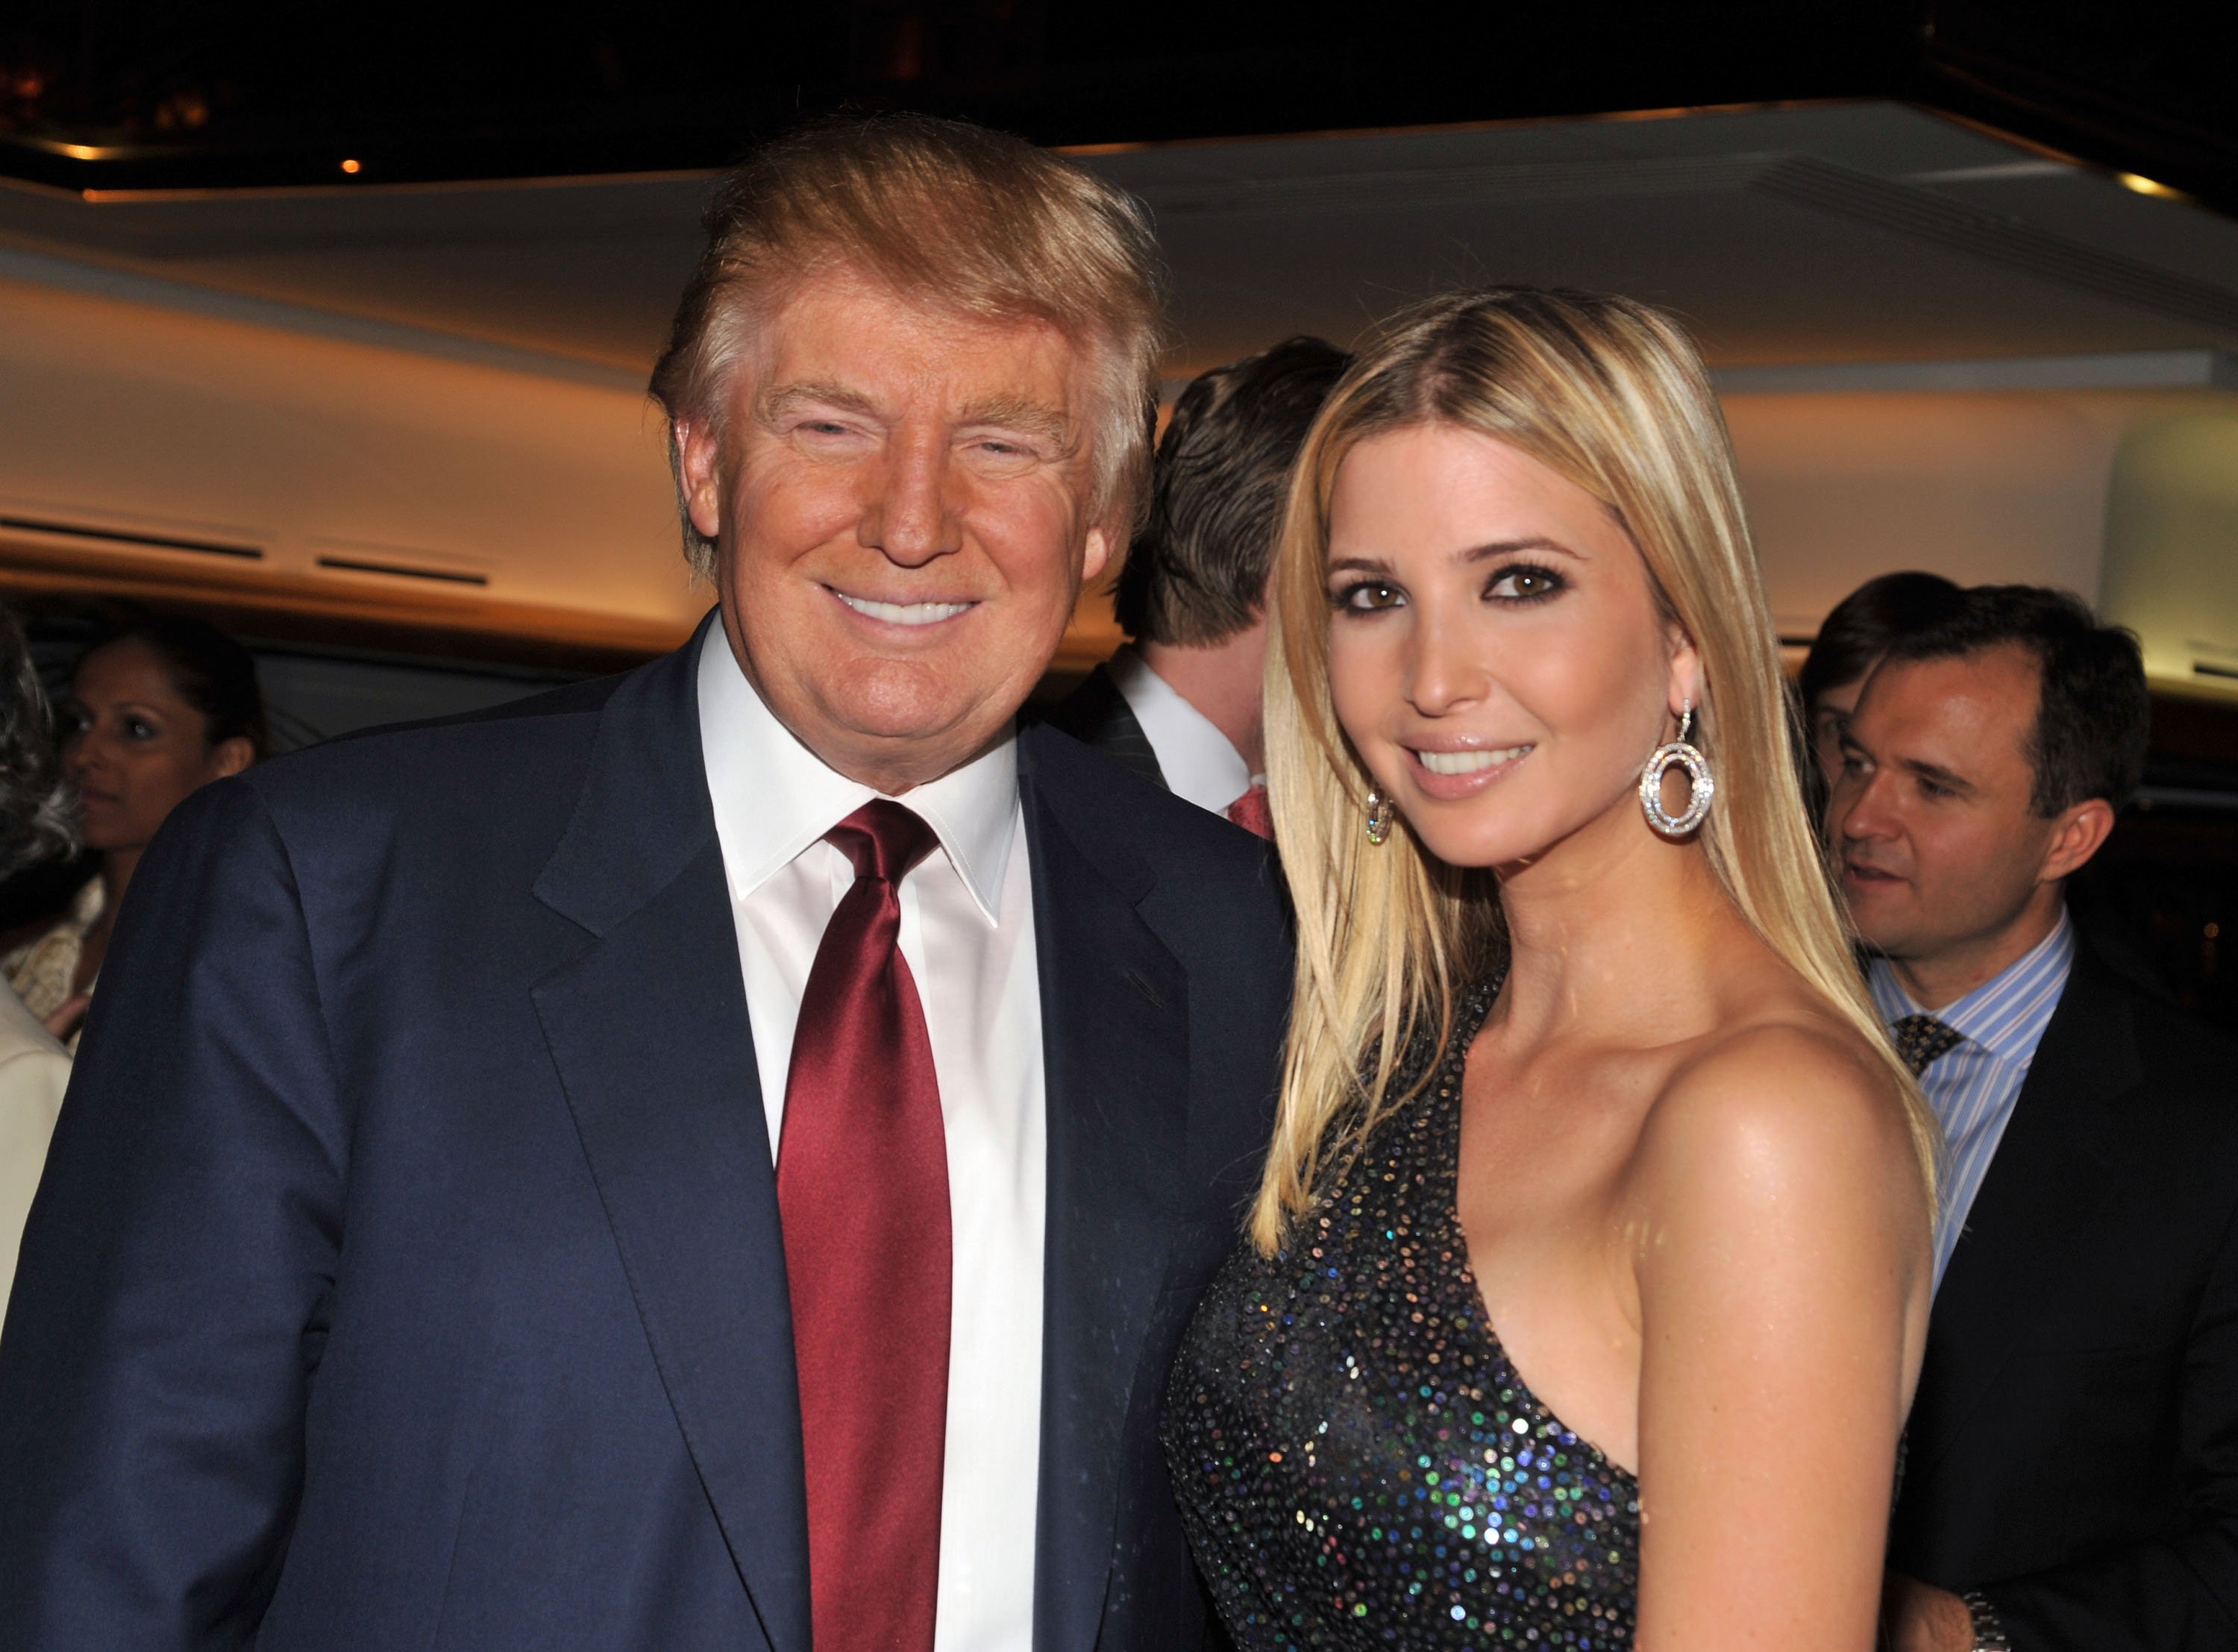  Donald Trump and Ivanka Trump attend the "The Trump Card: Playing to Win in Work and Life" book launch celebration at Trump Tower on October 14, 2009 in New York City | Photo: GettyImages